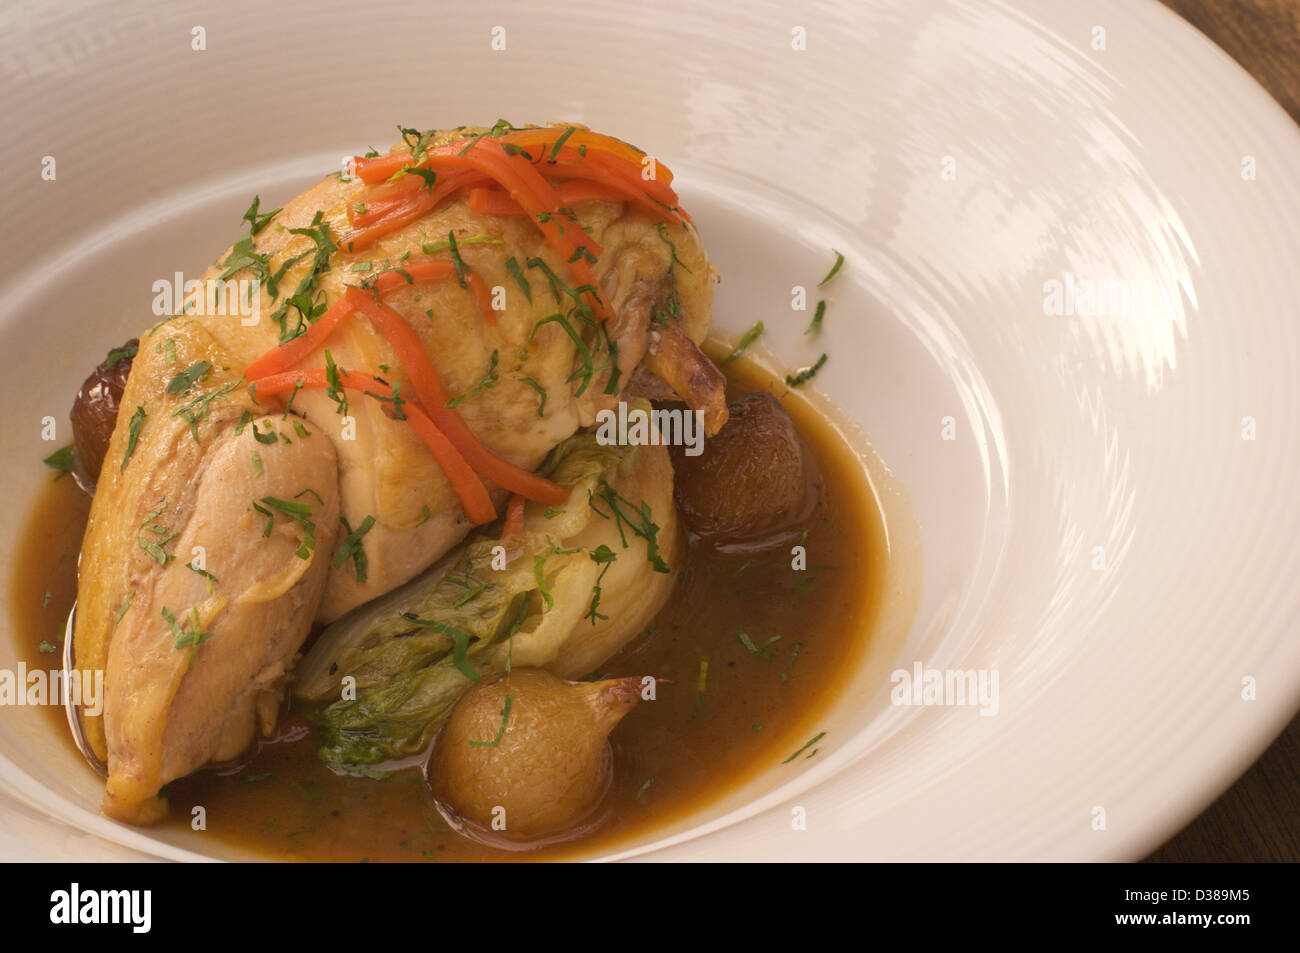 Pot roasted chicken with braised baby gem lettuce and pearl onions Stock Photo